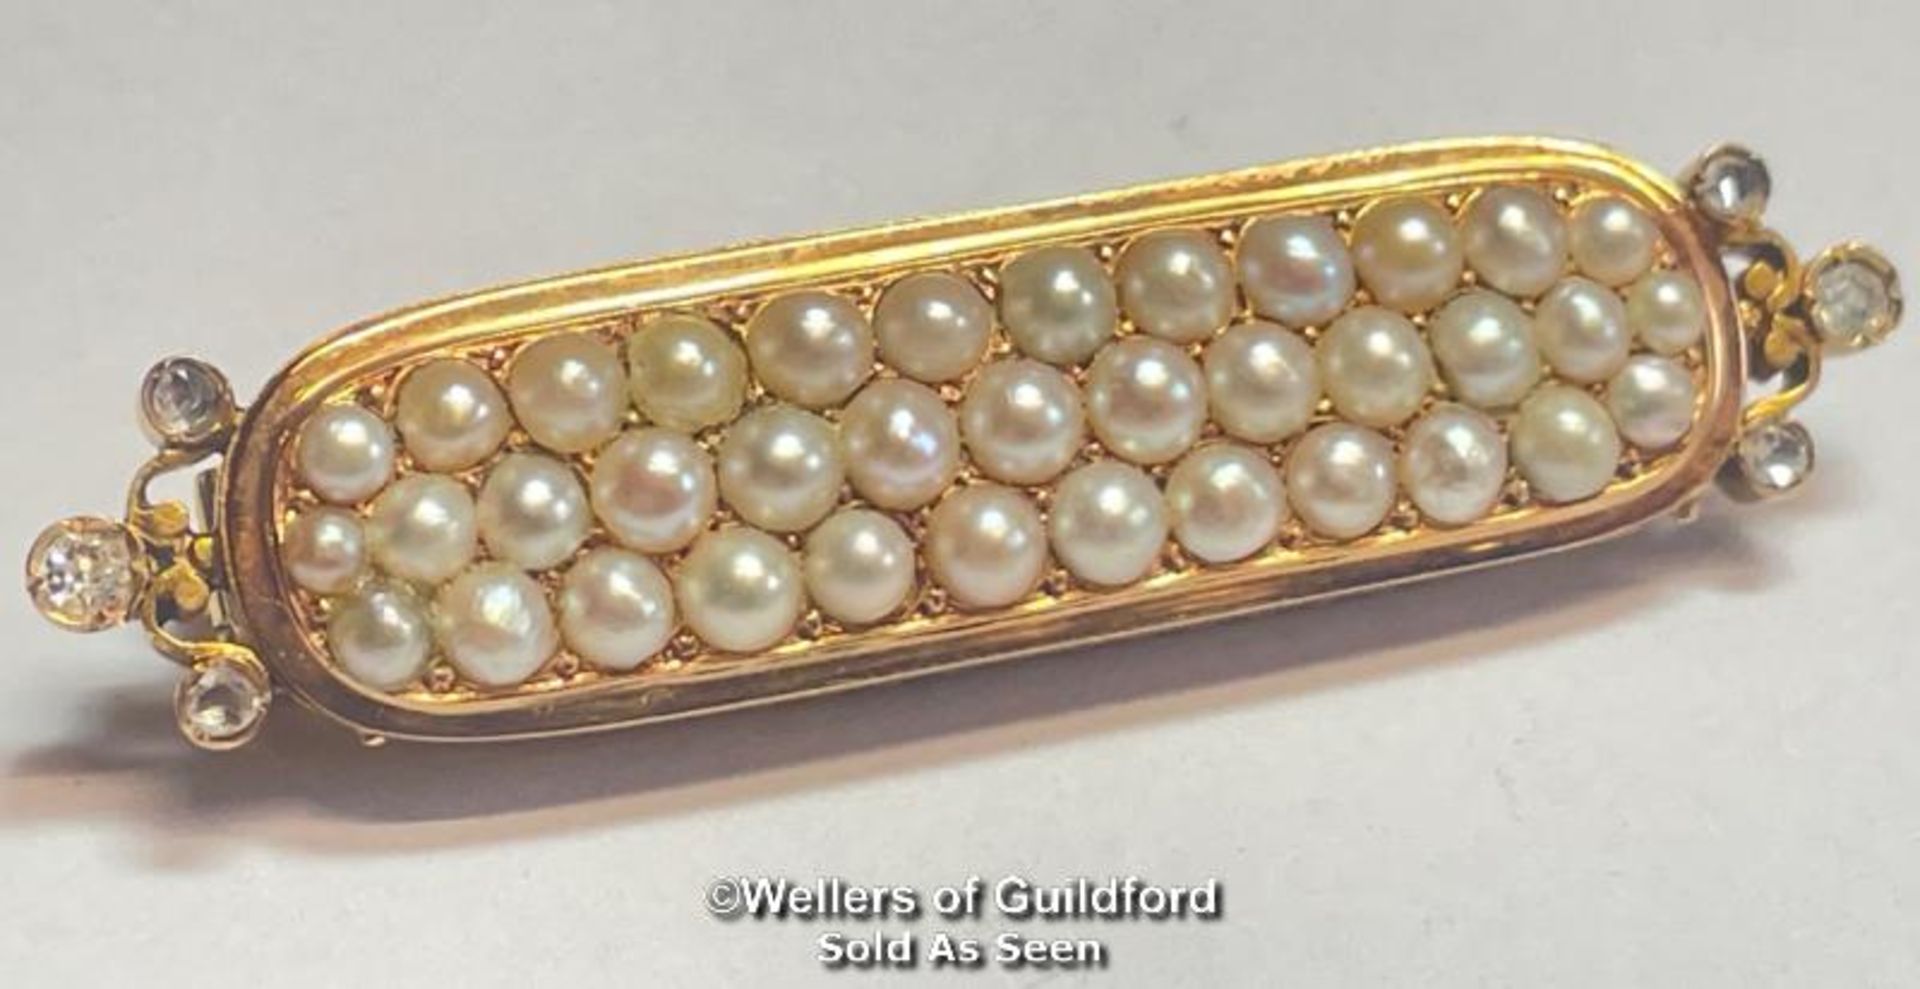 STOCK PIN IN YELLOW METAL WITH THREE ROWS OF SPLIT PEARLS AND ROSE CUT DIAMOND TERMINATIONS, NOT